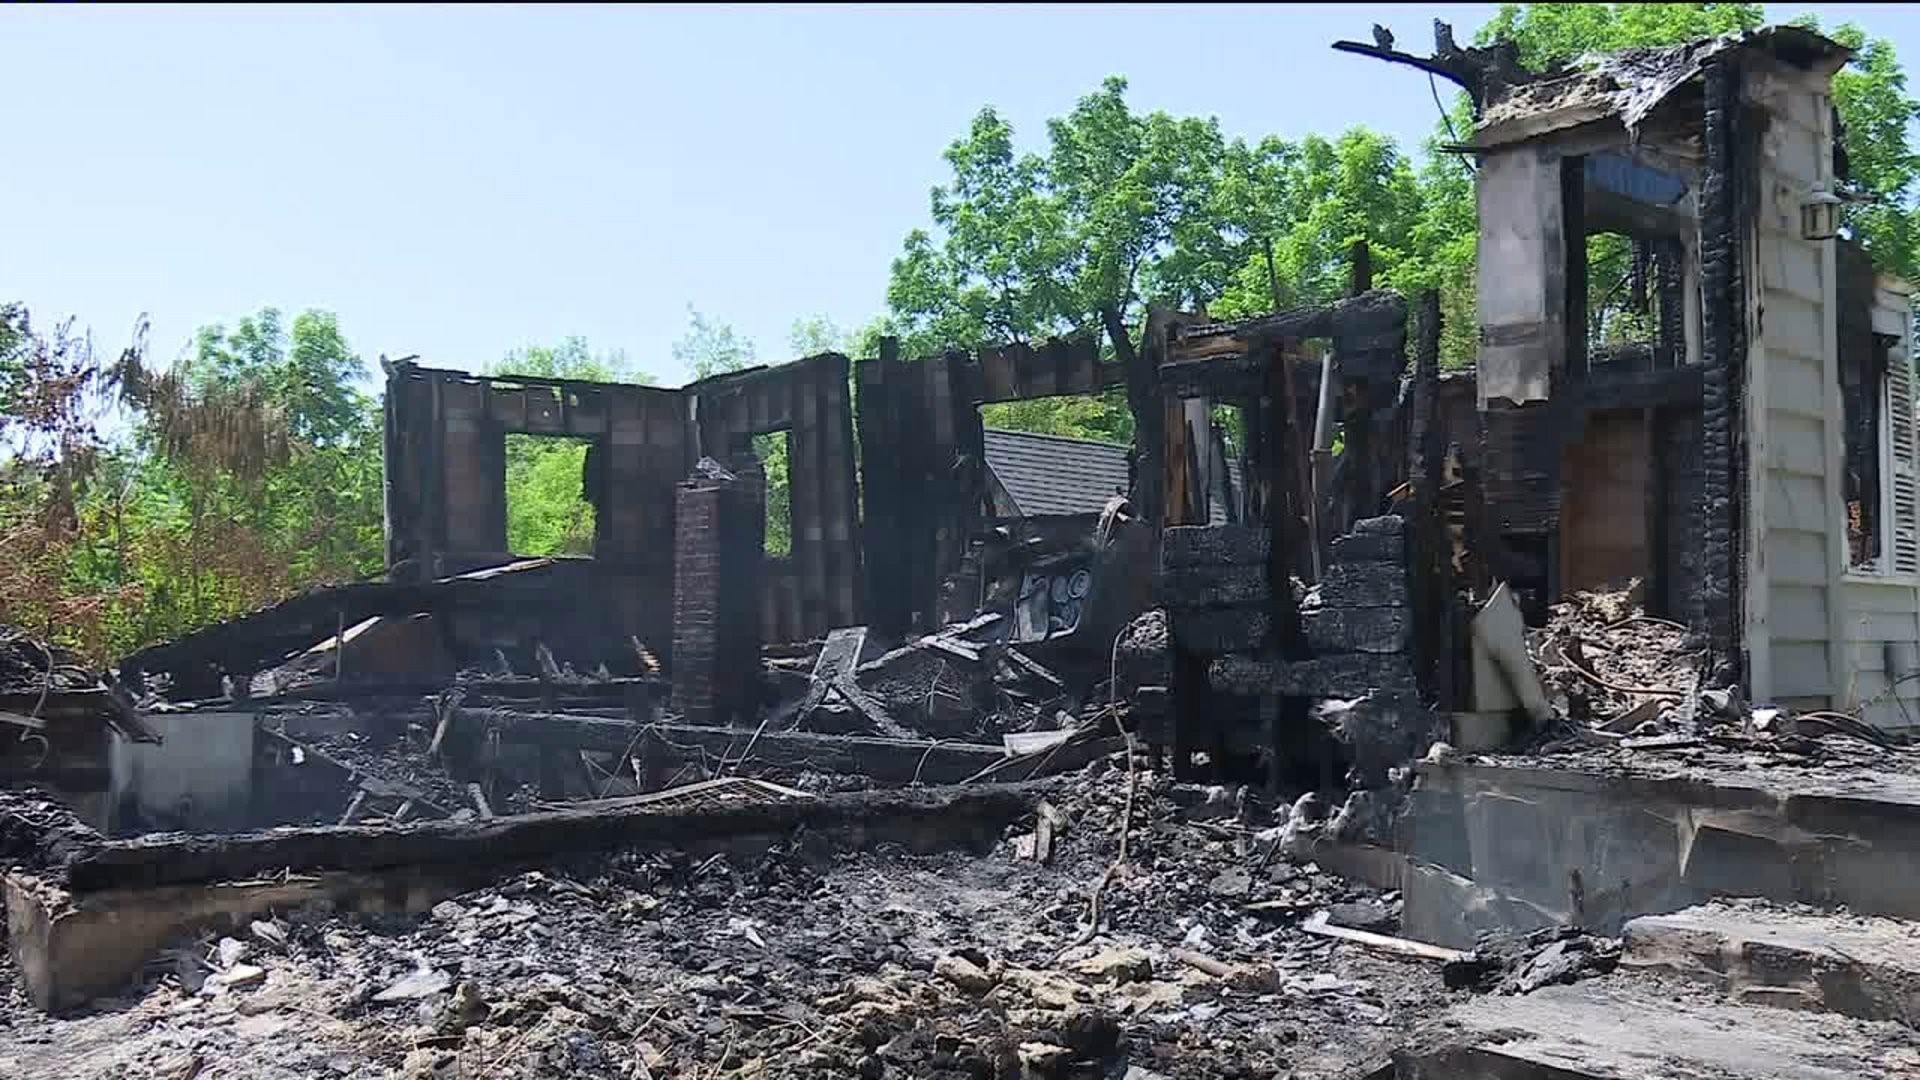 Suspected Arsons in Bradford County Have Neighbors Worried